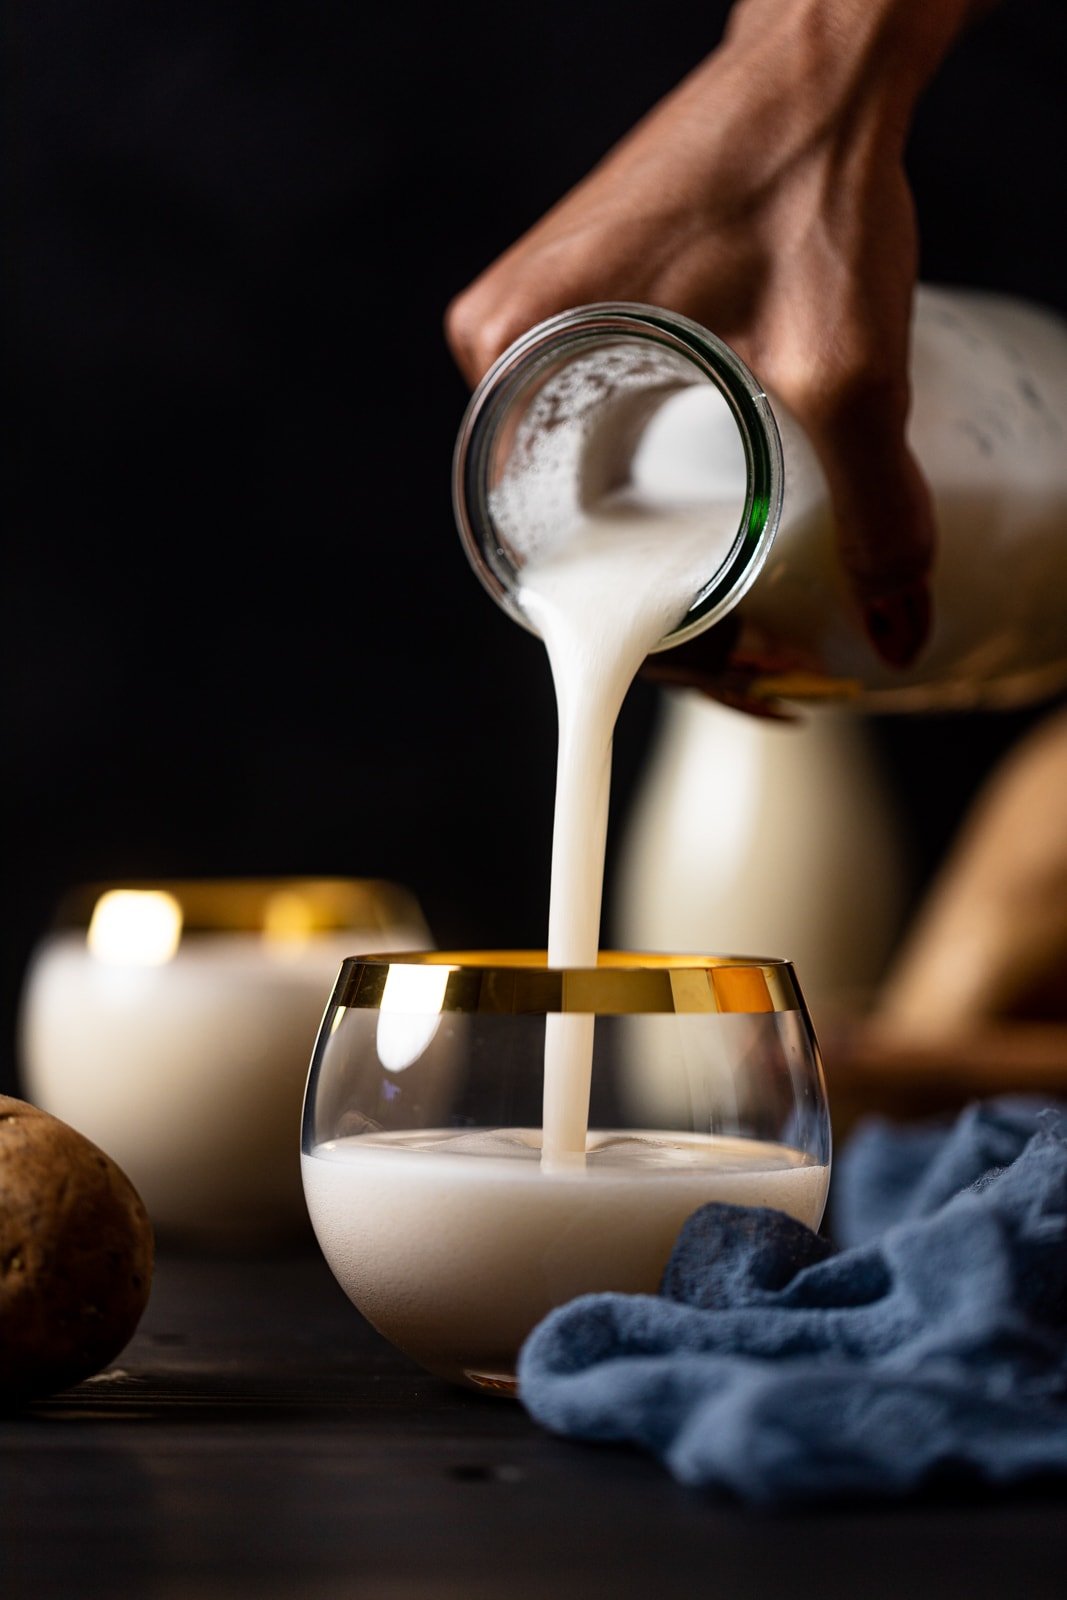 Glass carafe pouring potato milk into a gold-rimmed glass